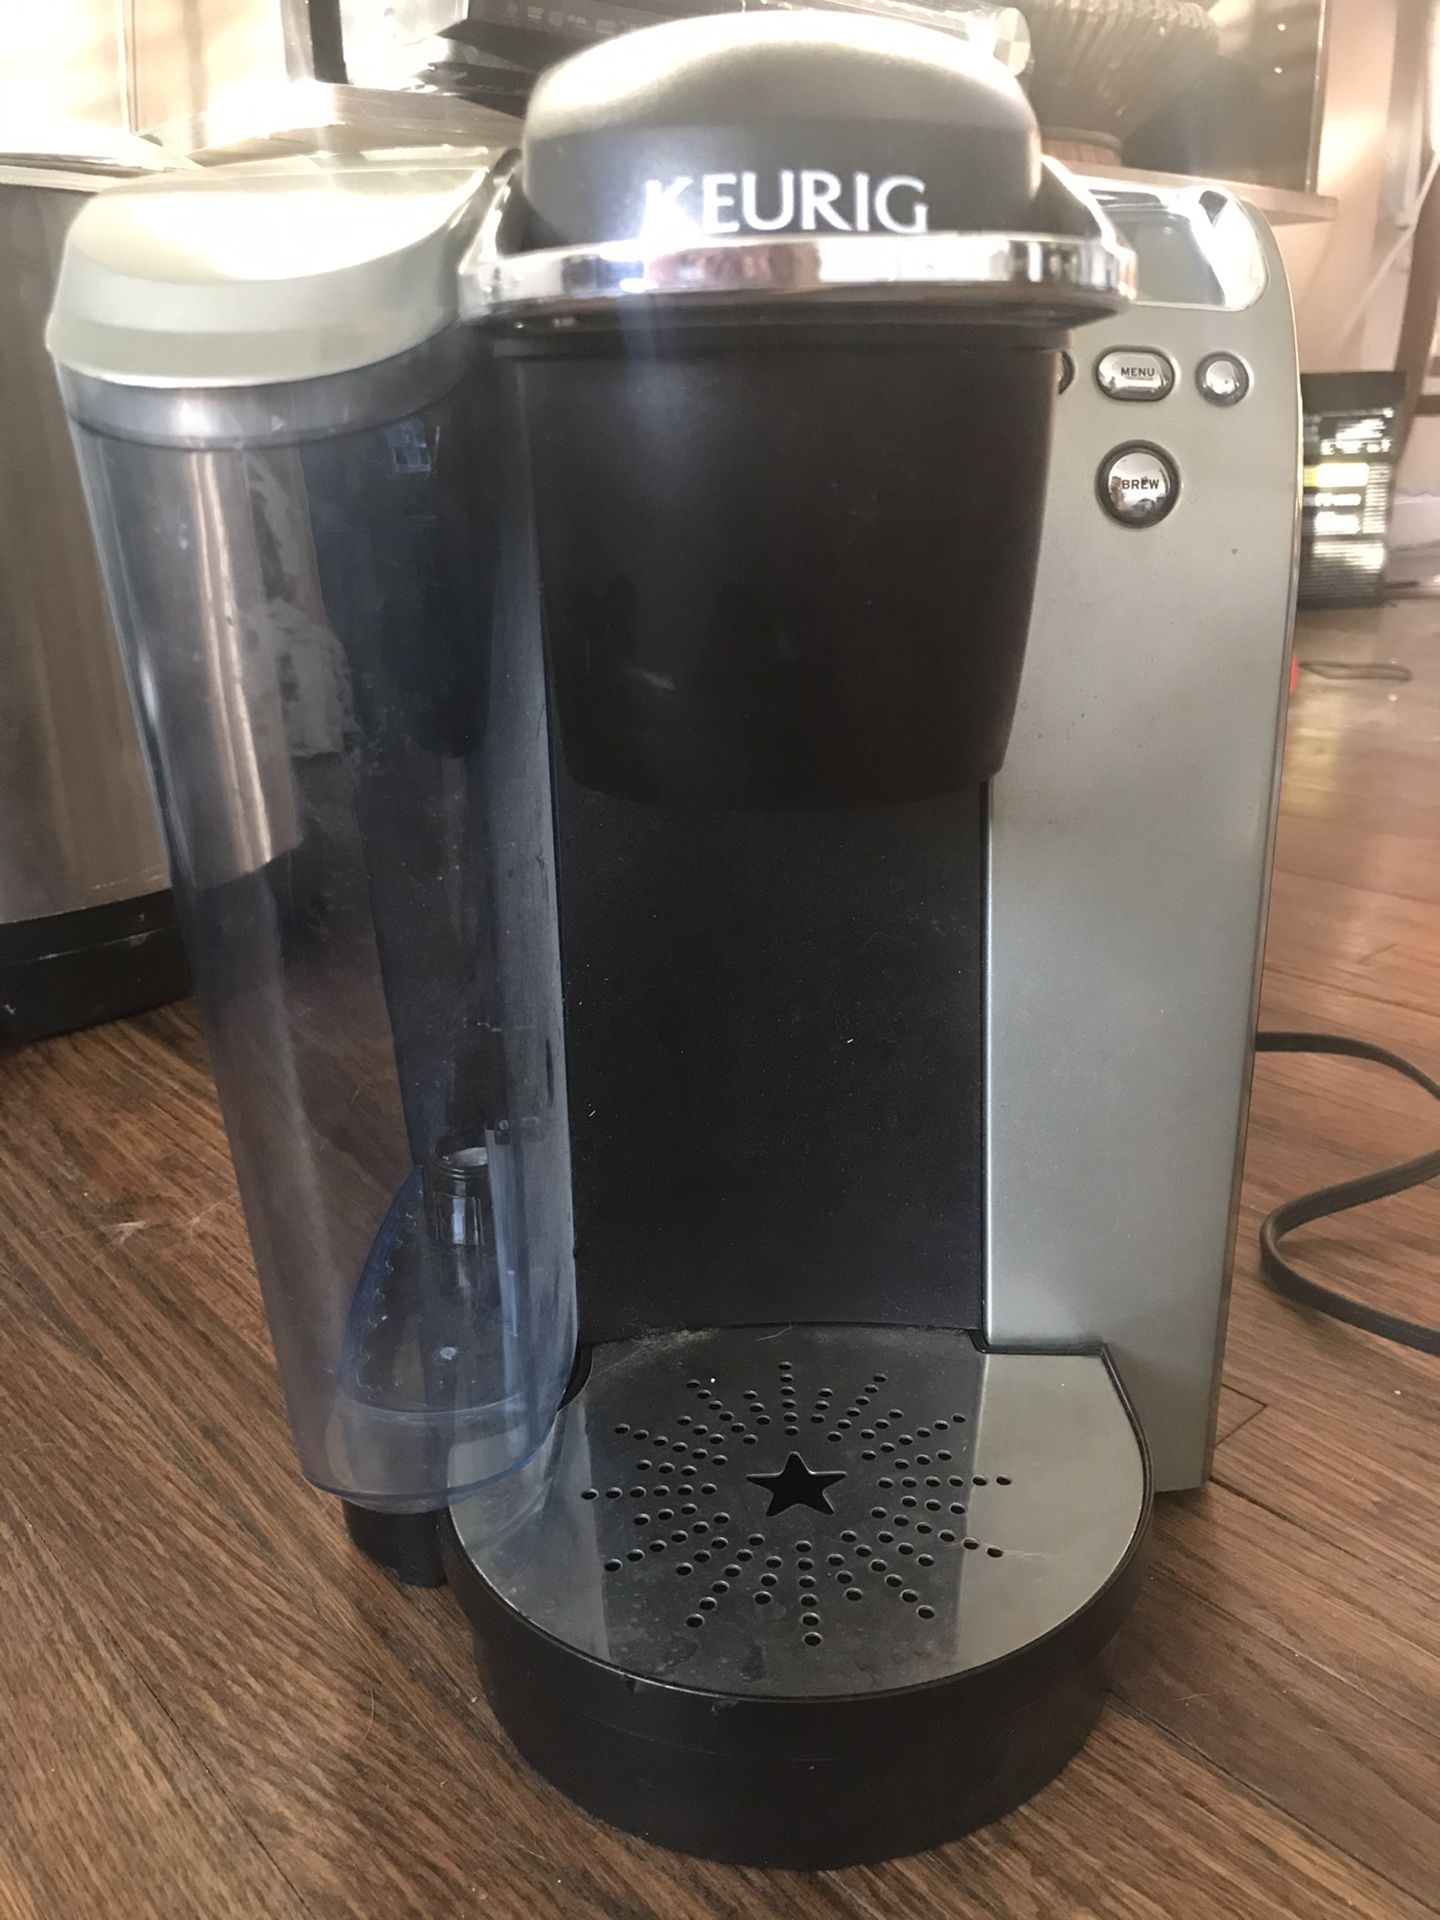 Keurig Coffee Maker with 30 K-Cup holder and assorted coffee